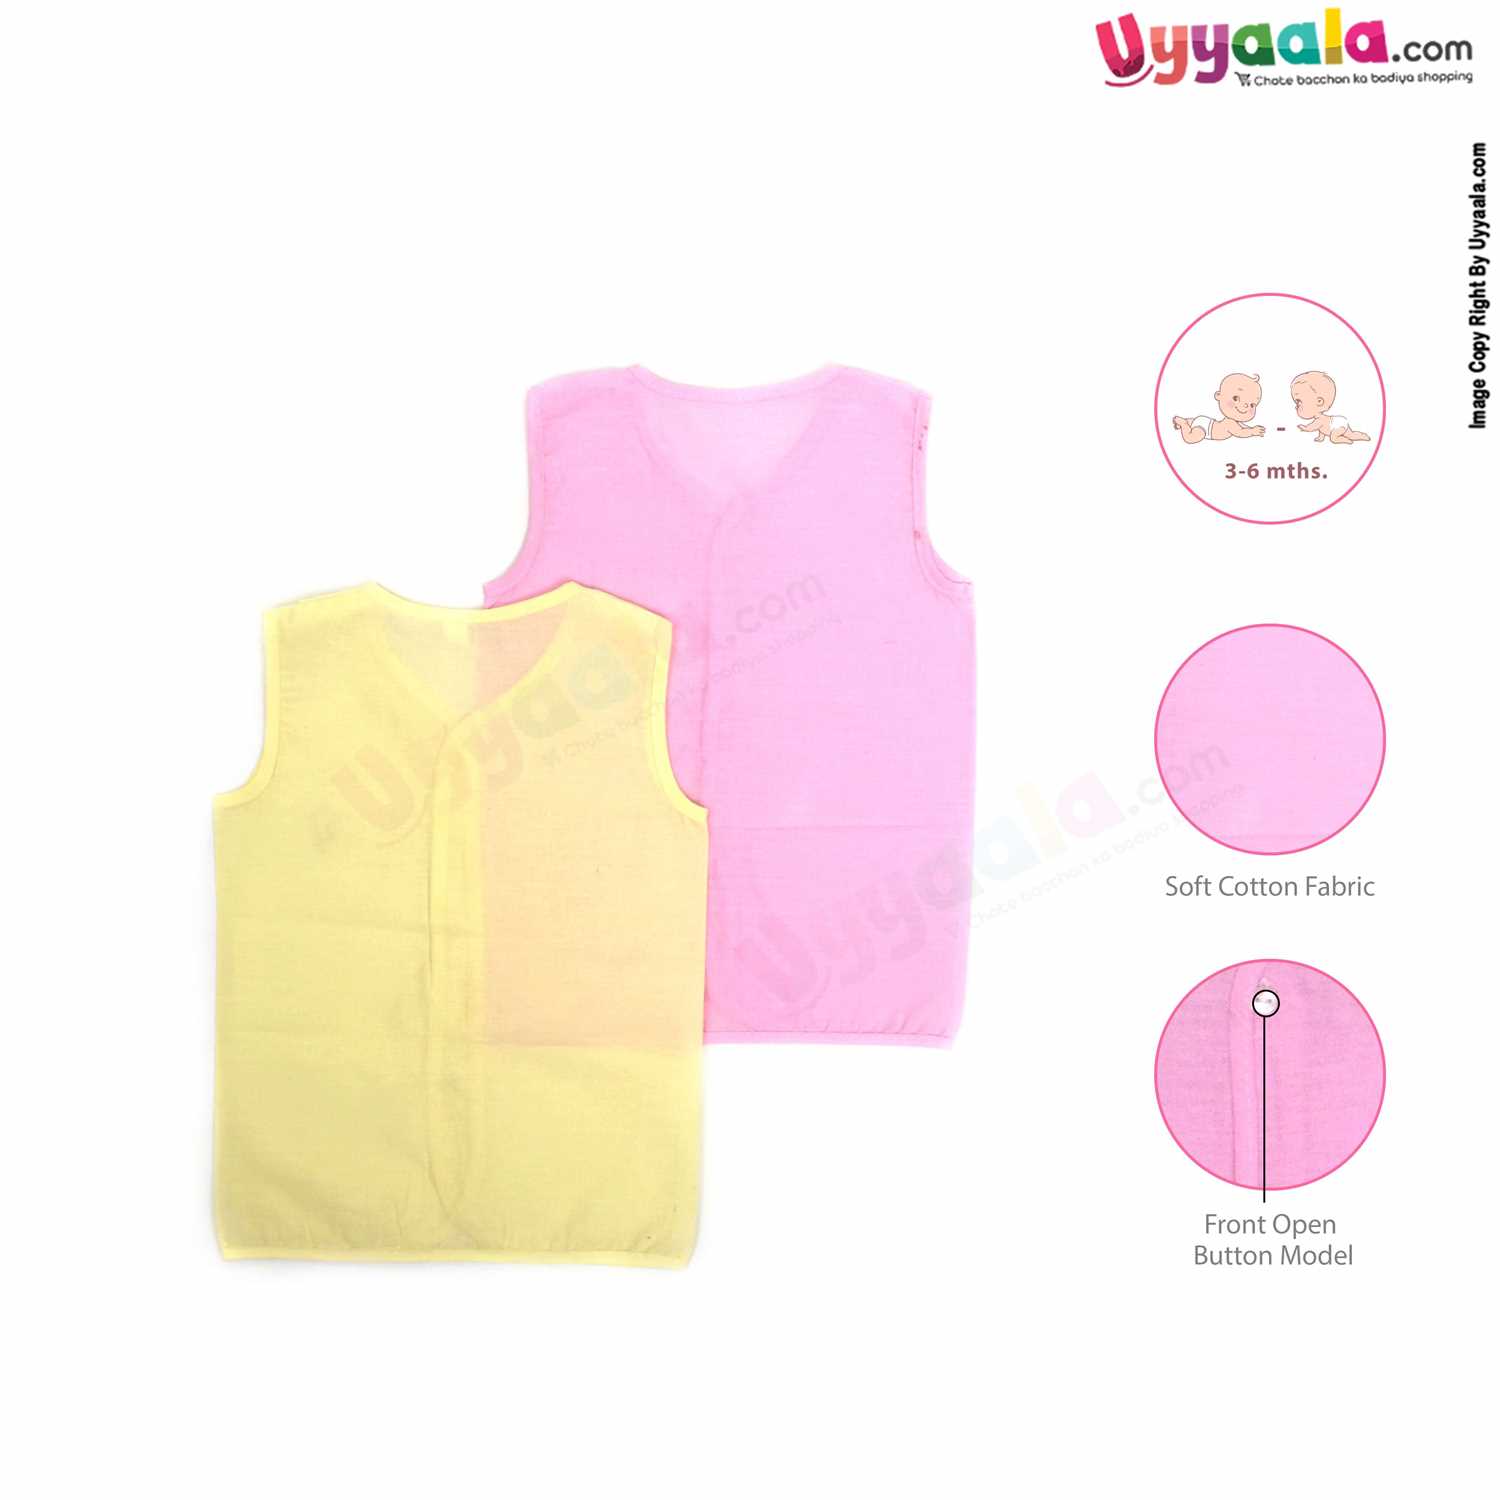 POLAR CUBS Sleeveless Baby Jabla Set, Front Opening Button Model, Premium Quality Cotton Baby Wear, (3-6M), 2Pack - Pink & Yellow